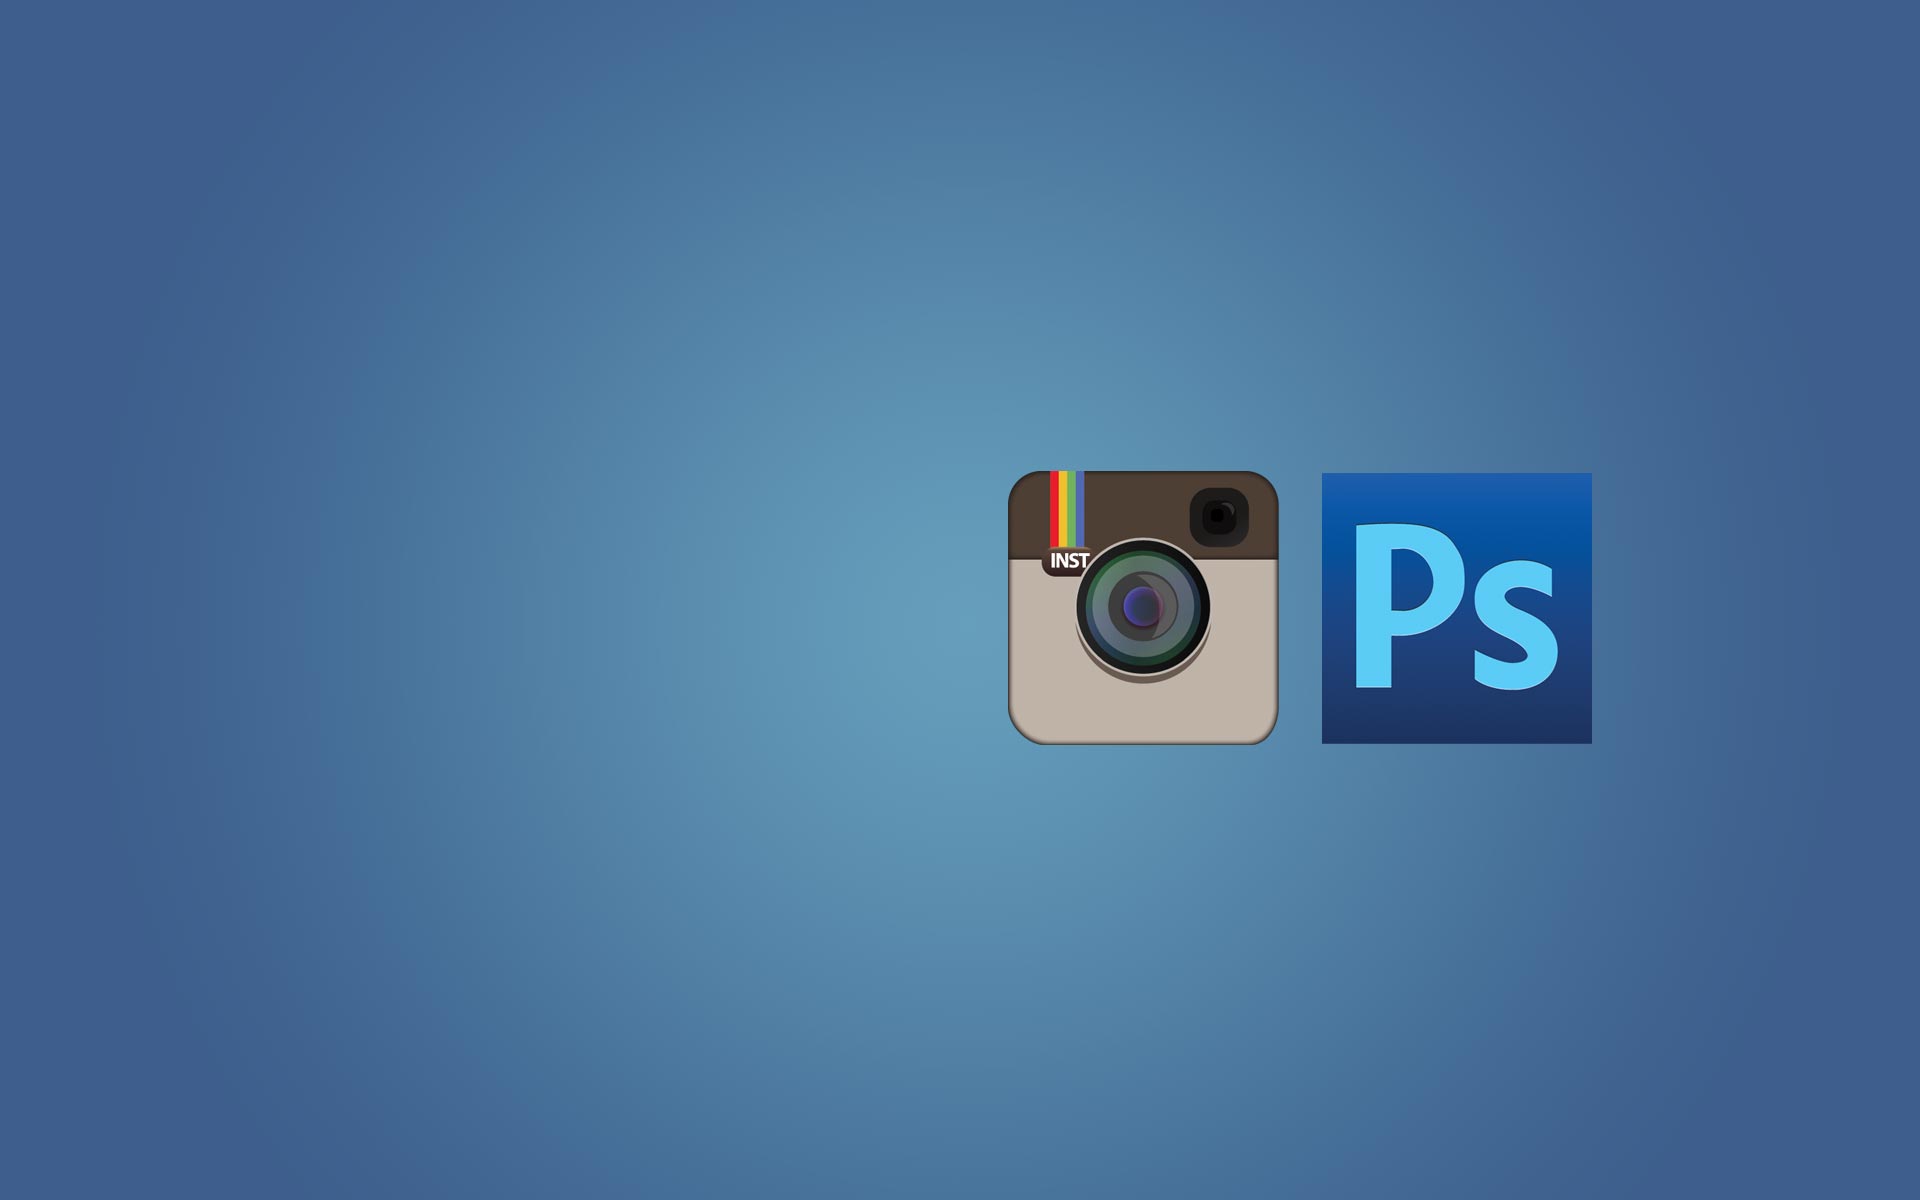 10 Instagram-style filters for Photoshop